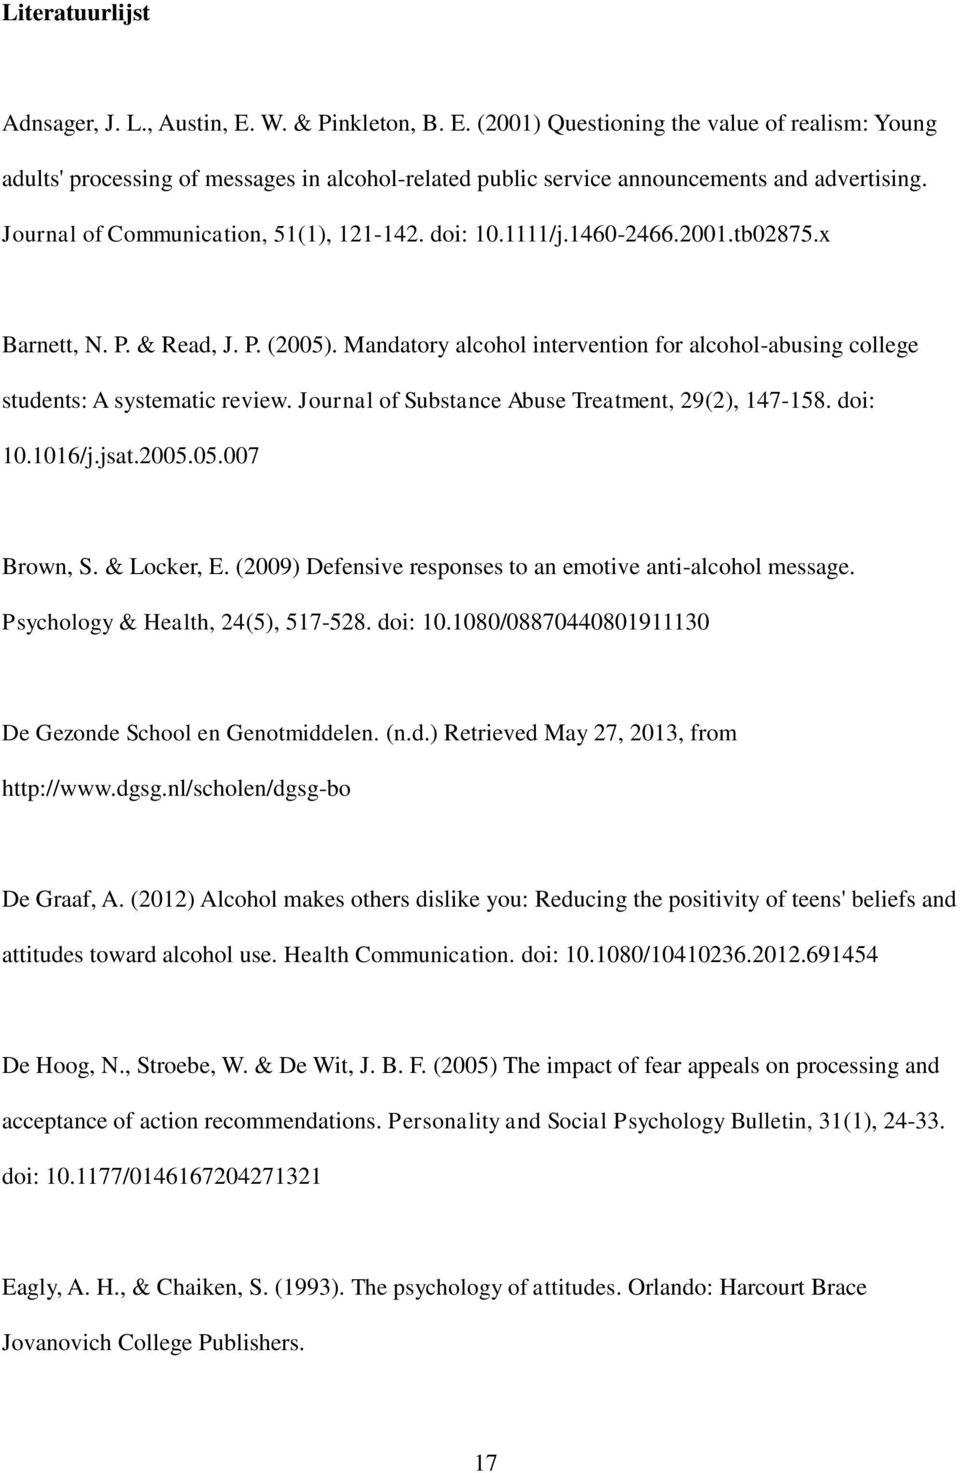 Mandatory alcohol intervention for alcohol-abusing college students: A systematic review. Journal of Substance Abuse Treatment, 29(2), 147-158. doi: 10.1016/j.jsat.2005.05.007 Brown, S. & Locker, E.